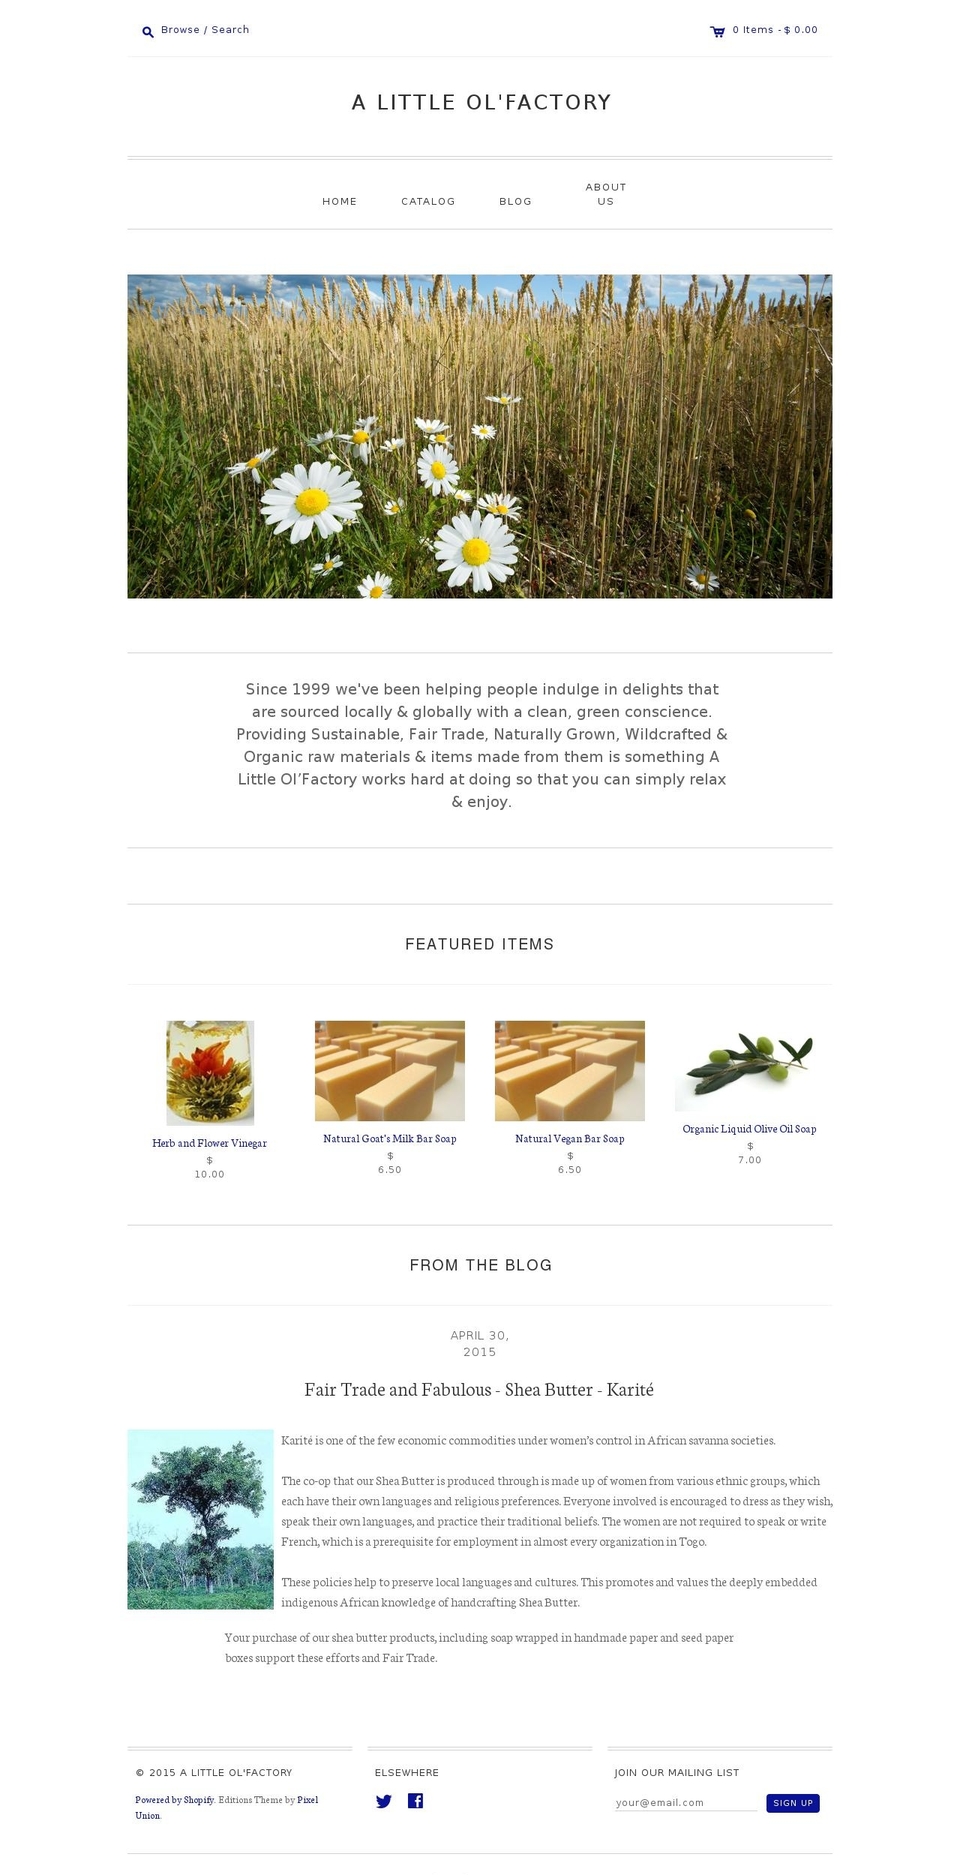 Editions Shopify theme site example alittleolfactory.com